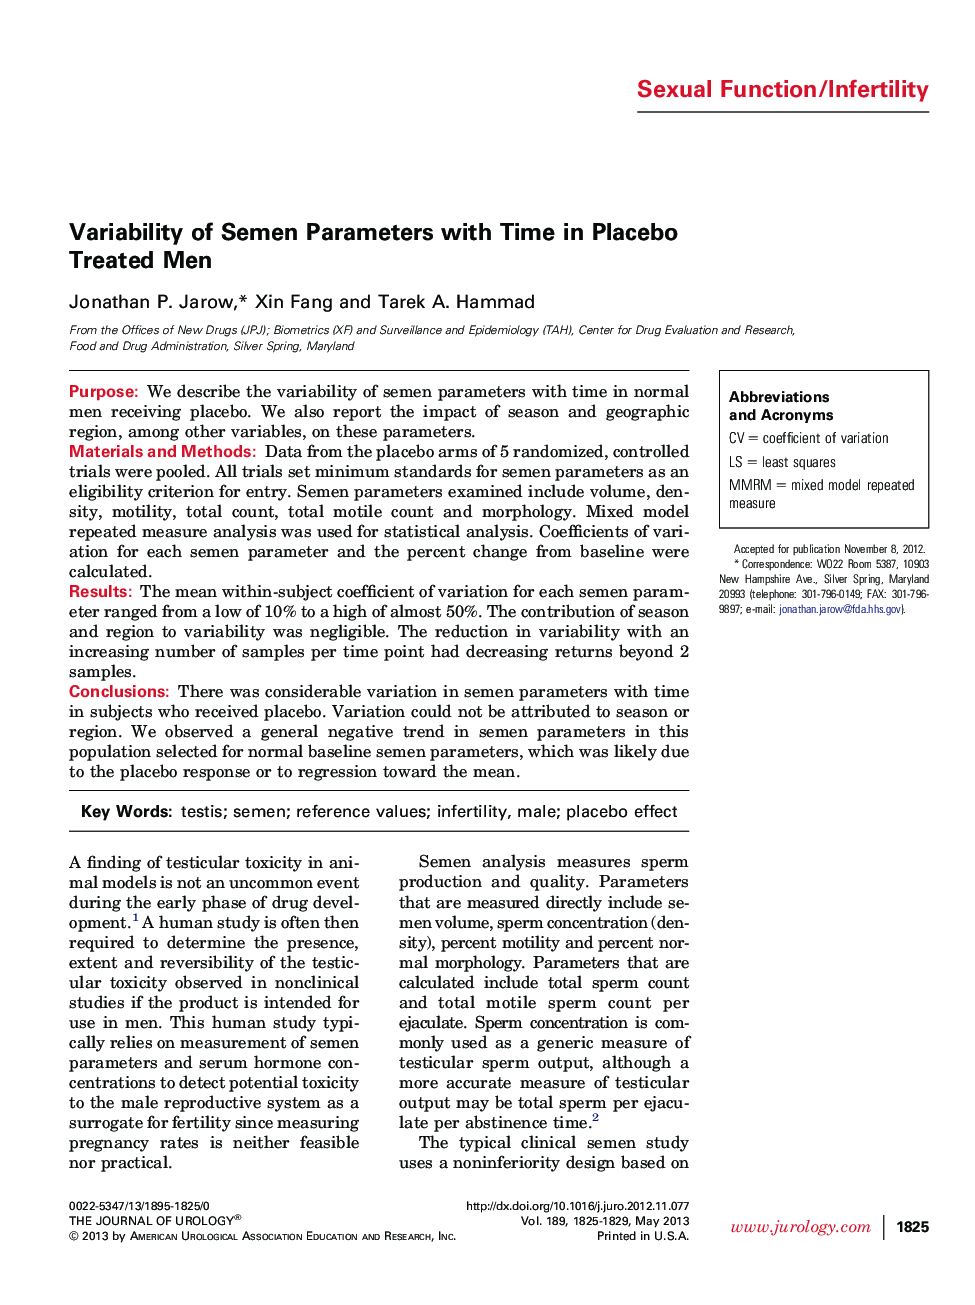 Variability of Semen Parameters with Time in Placebo Treated Men